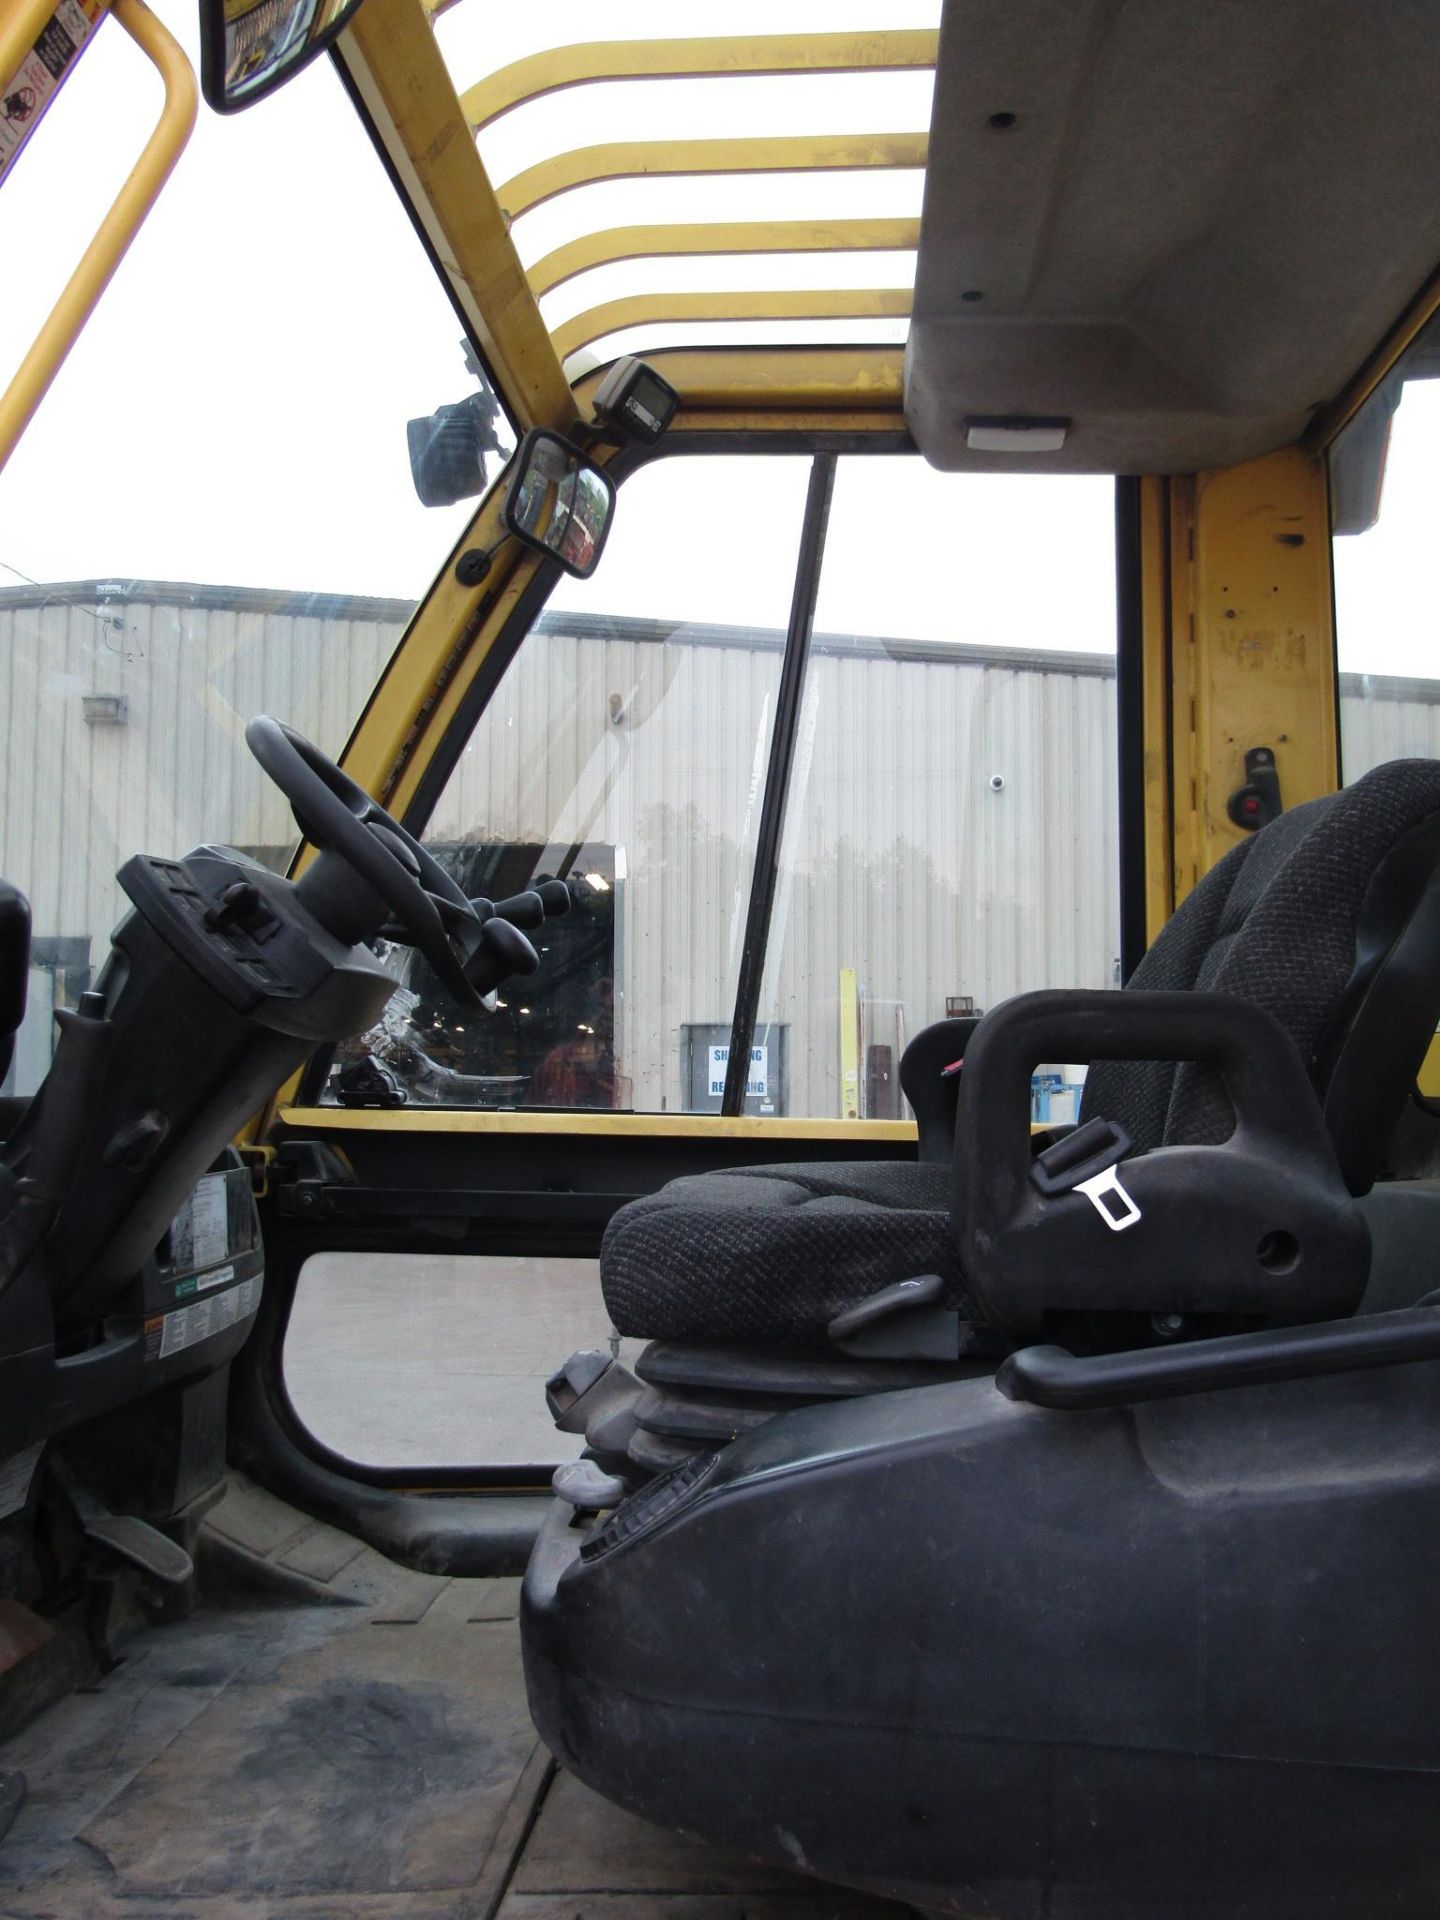 2012 Hyster 15500lbs Capacity OUTDOOR Forklift A/C & Heated CAB with sideshift & 72" forks LOW HOURS - Image 3 of 3